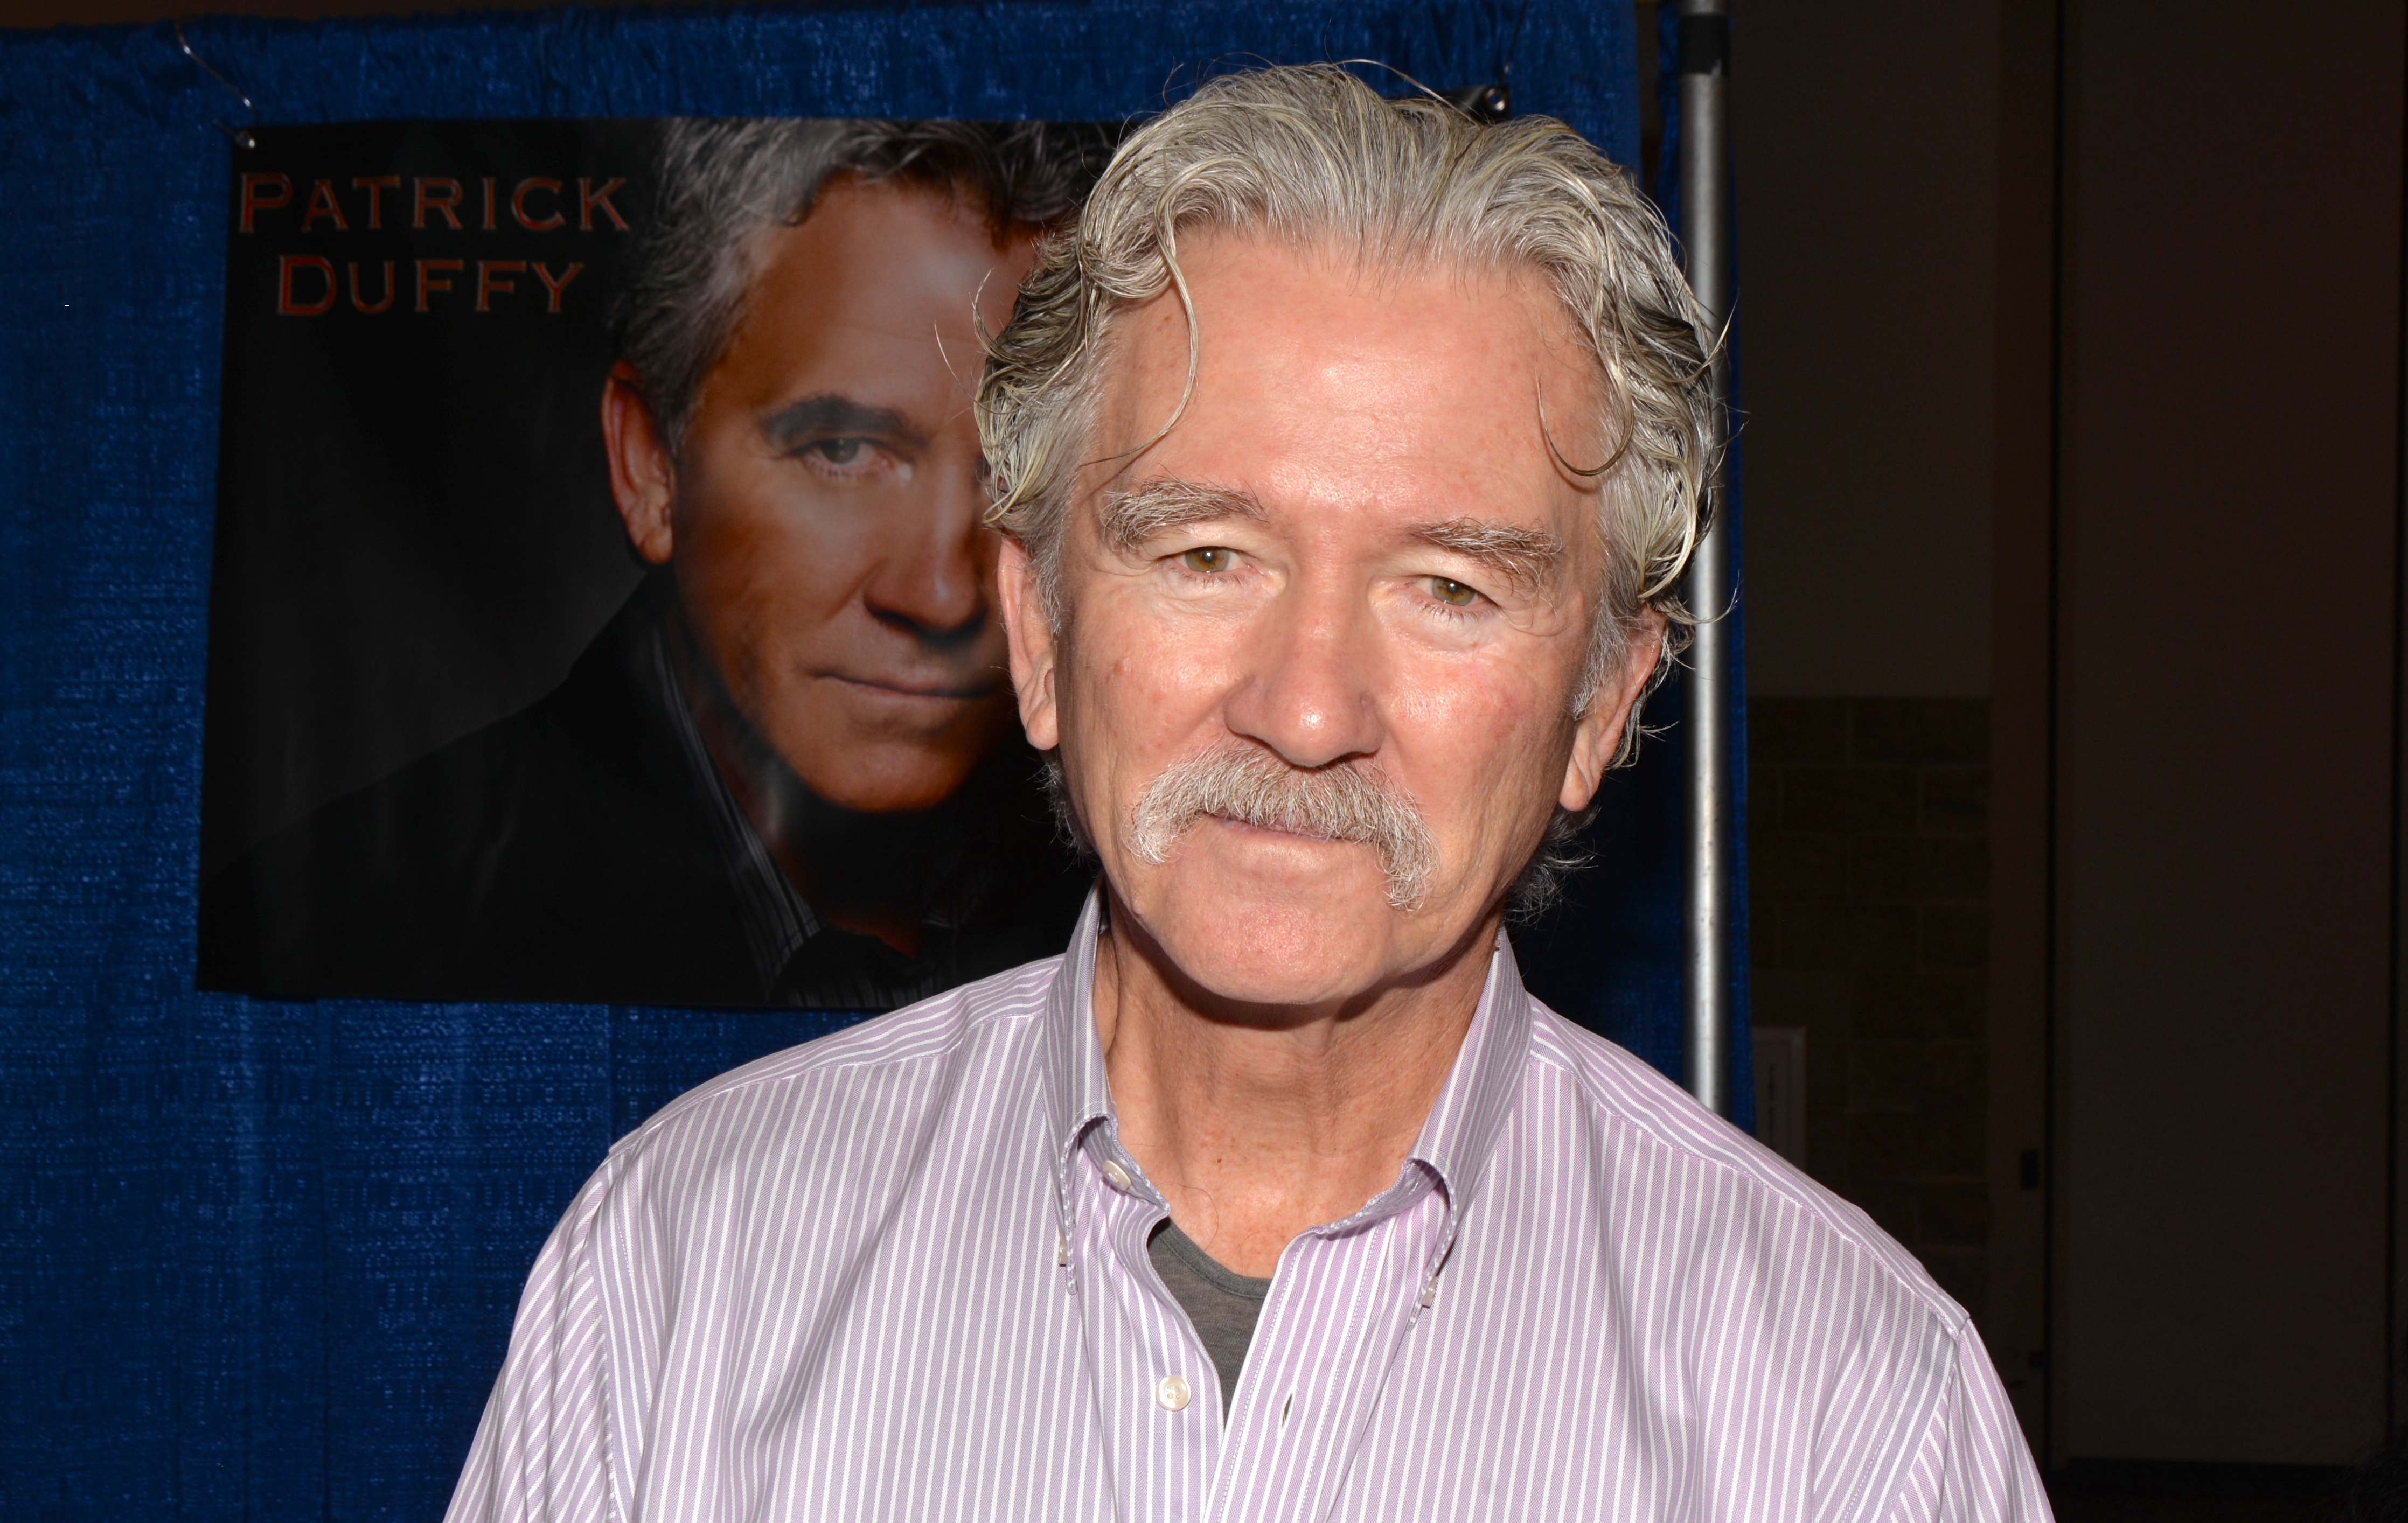 Patrick Duffy at NostalgiaCon at the Anaheim Convention Center at Anaheim, California on September 28, 2019 | Source: Getty Images